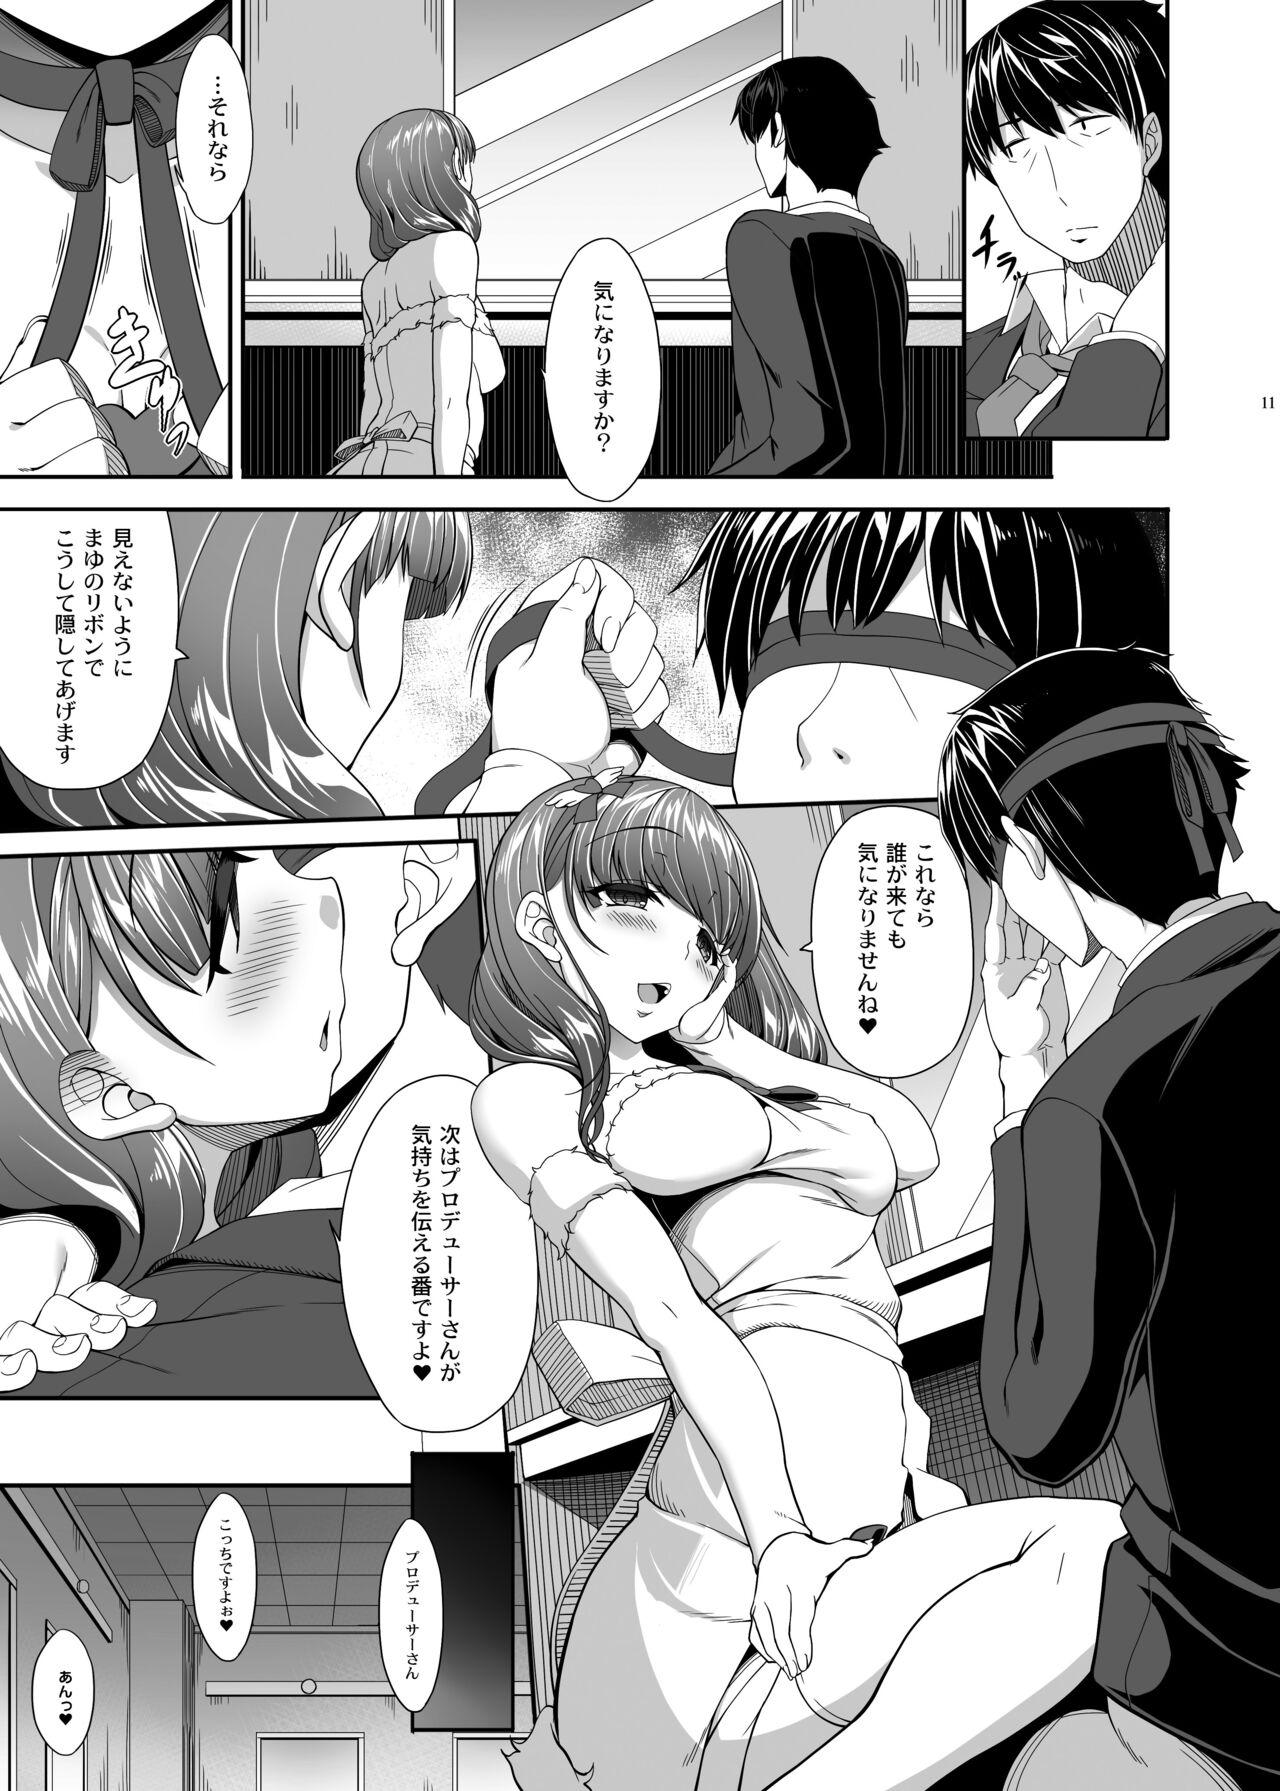 Relax Room of a secret for us - The idolmaster Amature Porn - Page 10